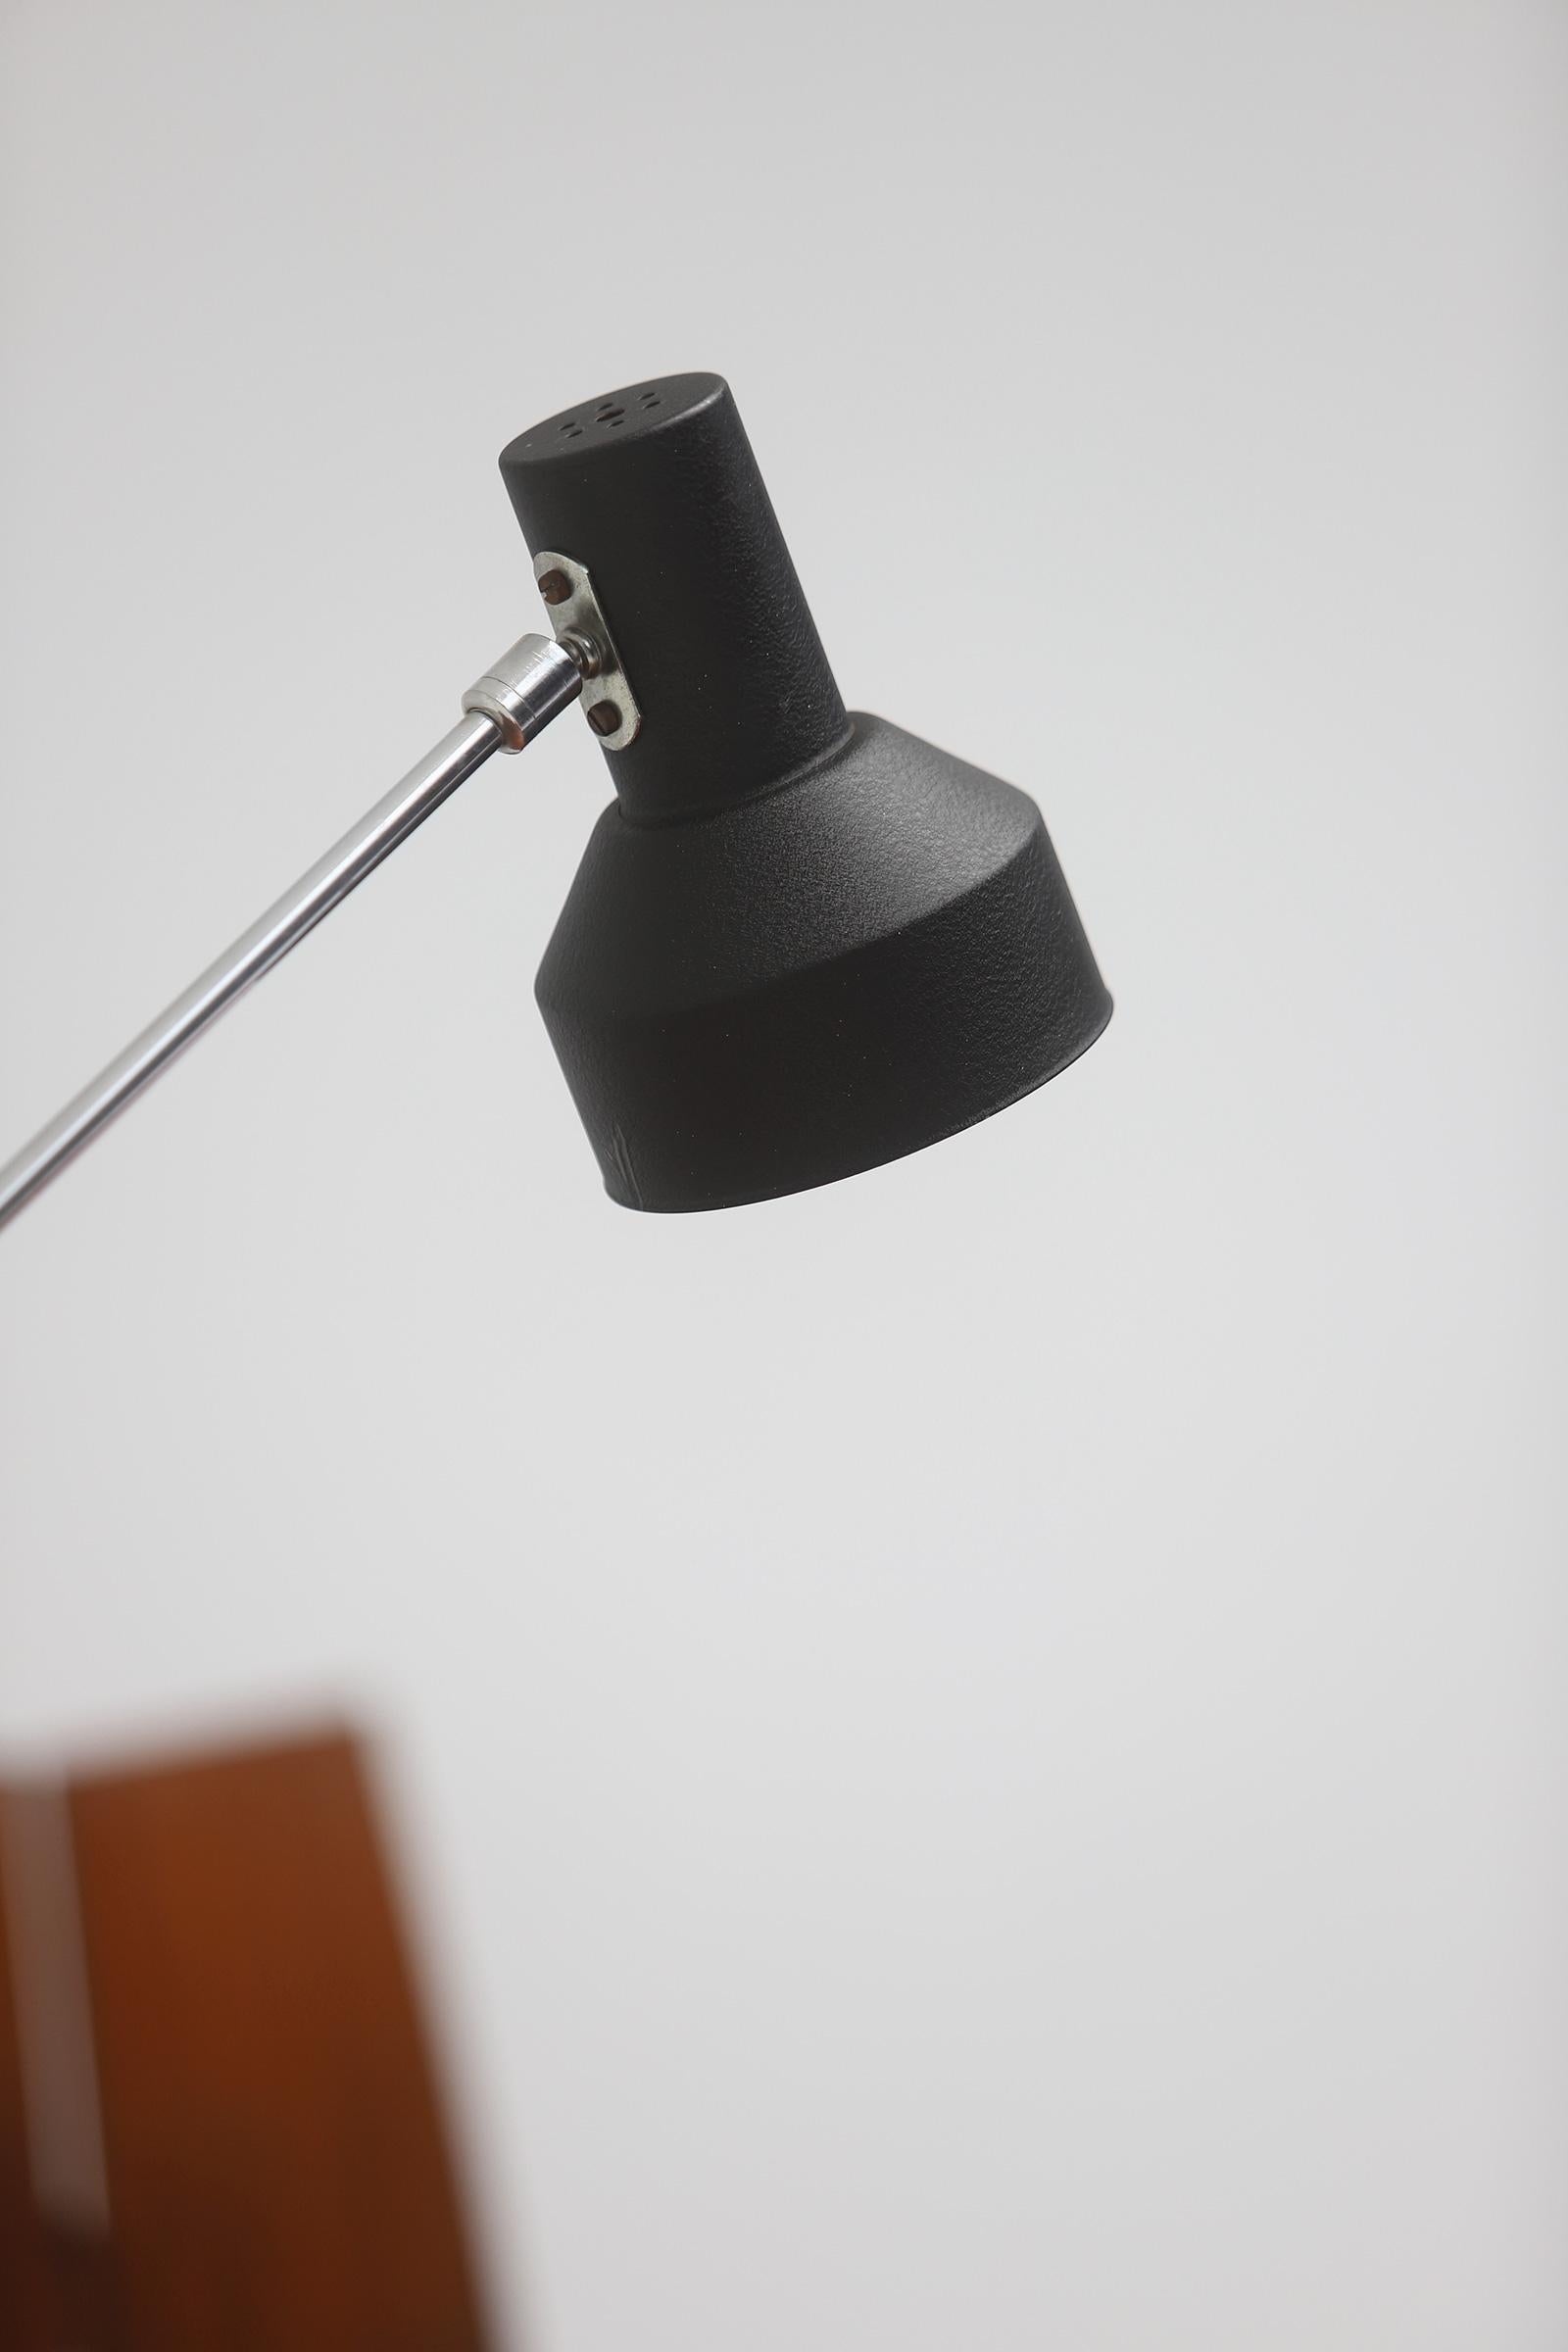 Mid-20th Century Mid-century adjustable black desk Lamp from the 1950s For Sale